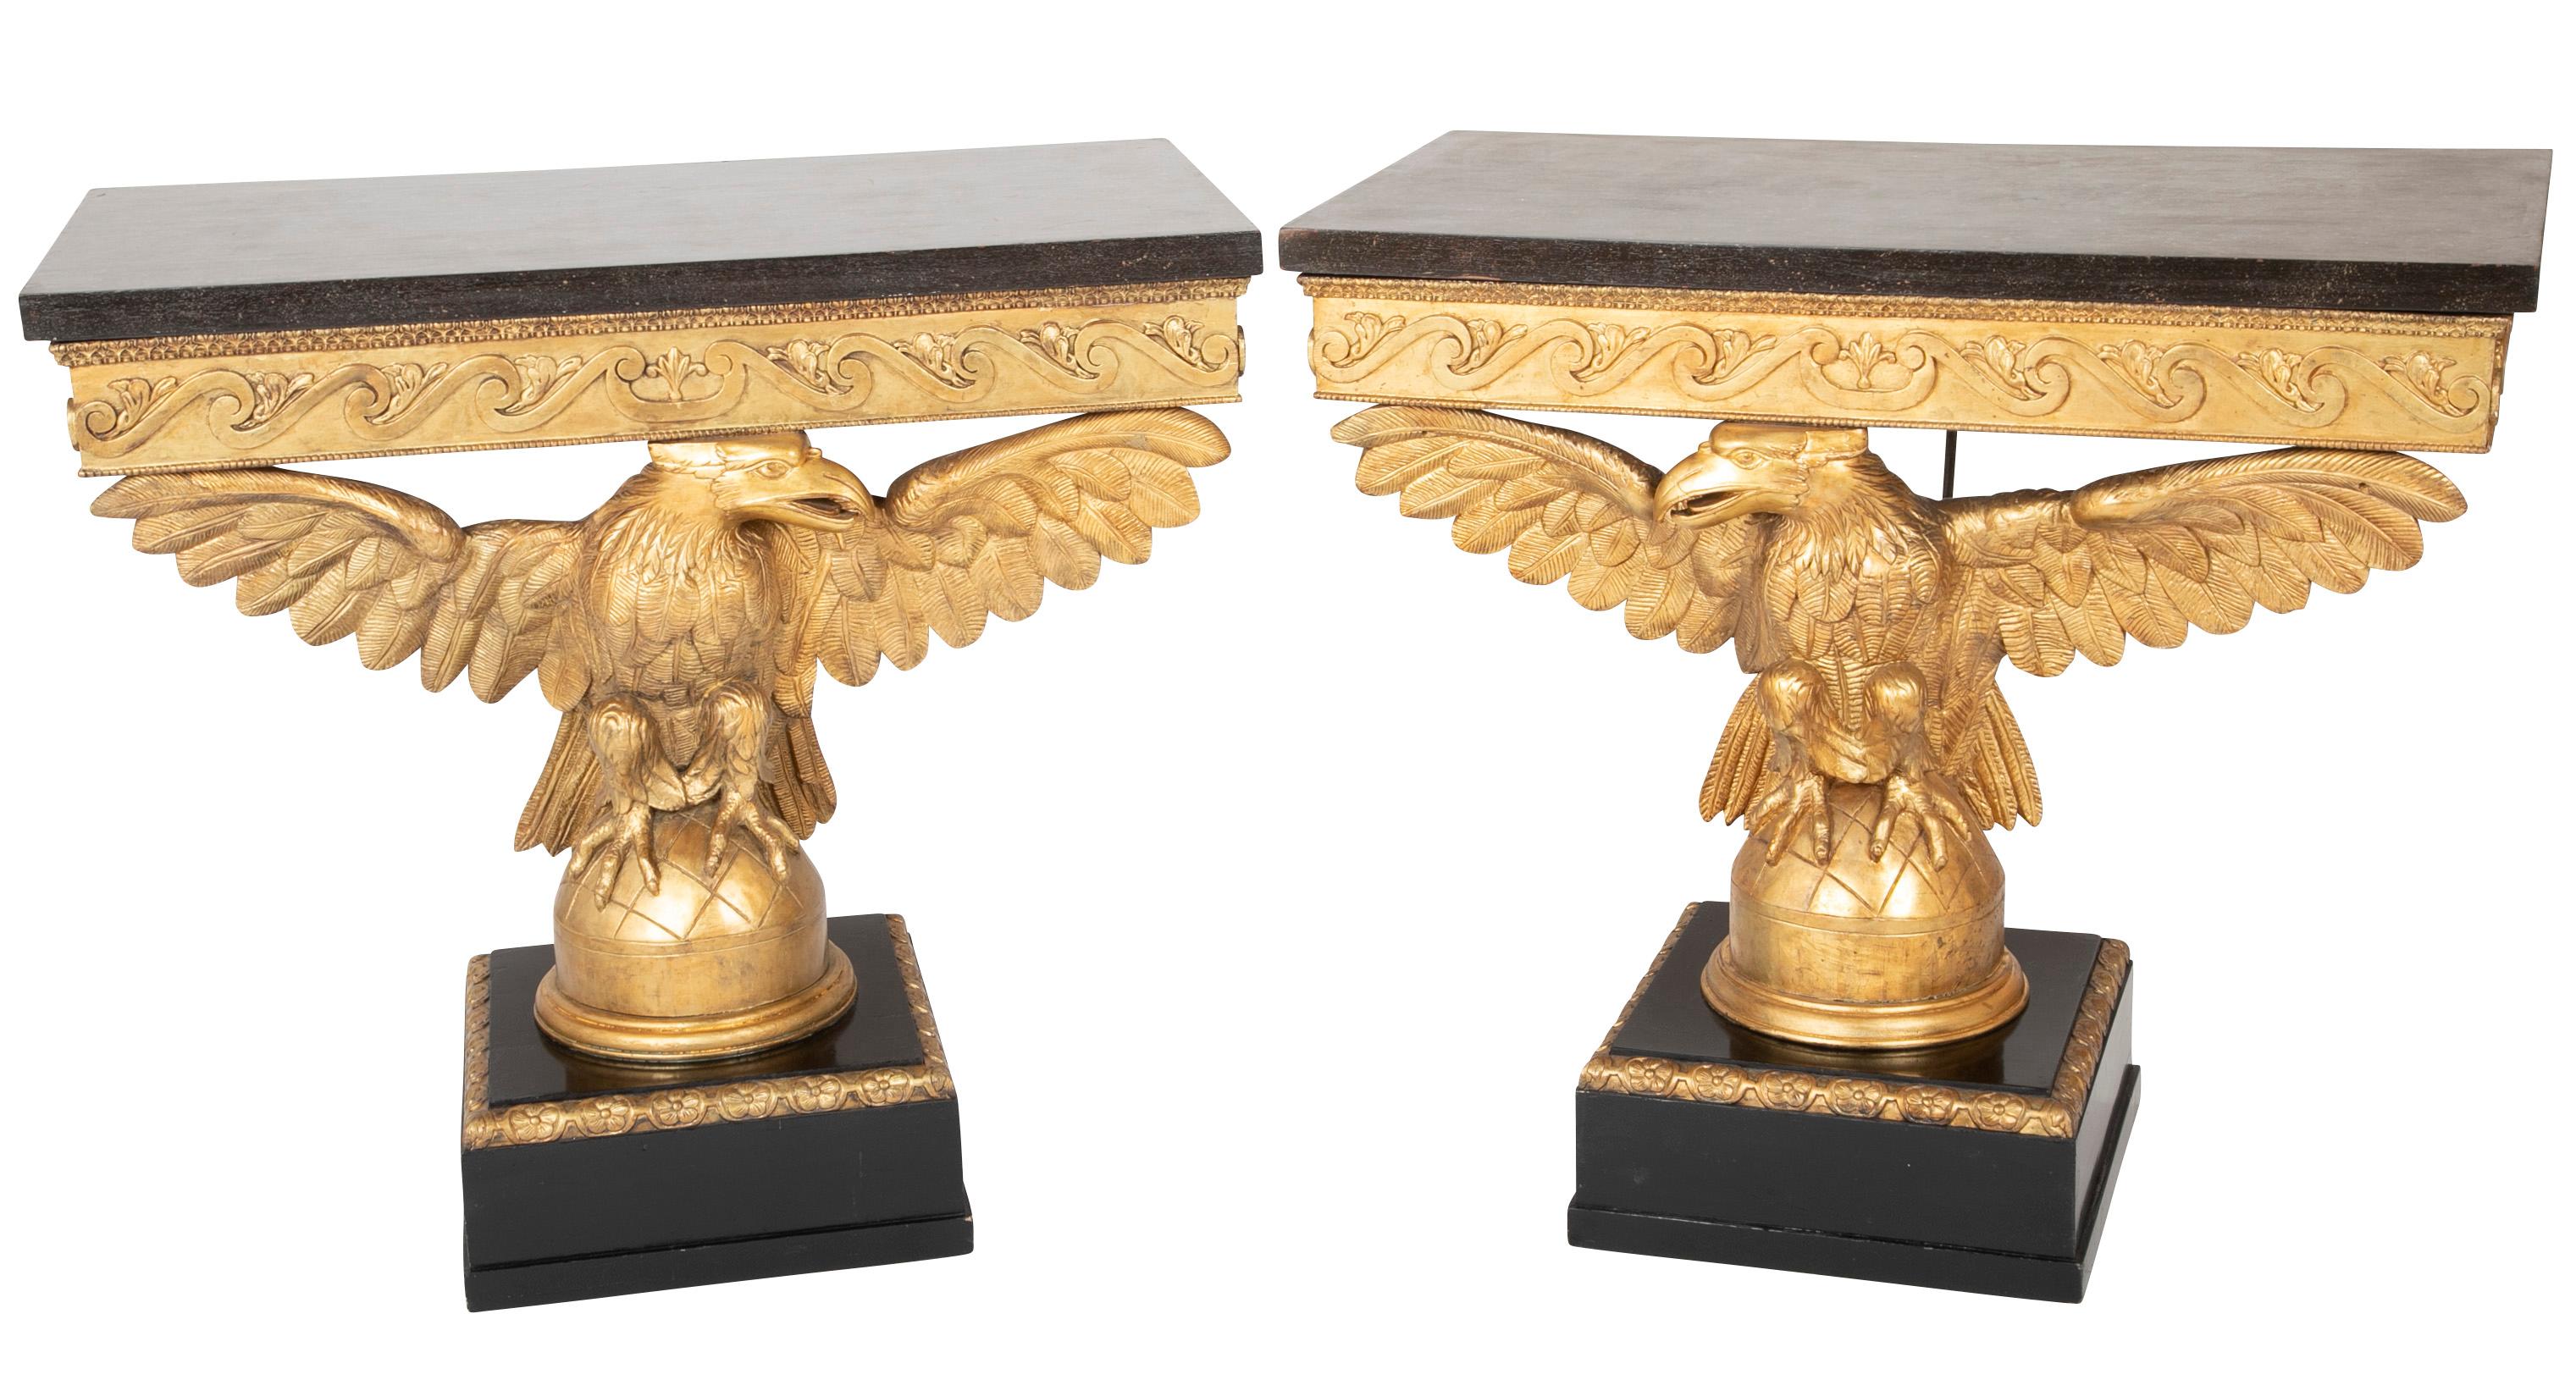 Pair of early to mid-19th century giltwood eagle console tables (opposing) with faux marble tops, vetruvian scroll aprons and plinth bases.